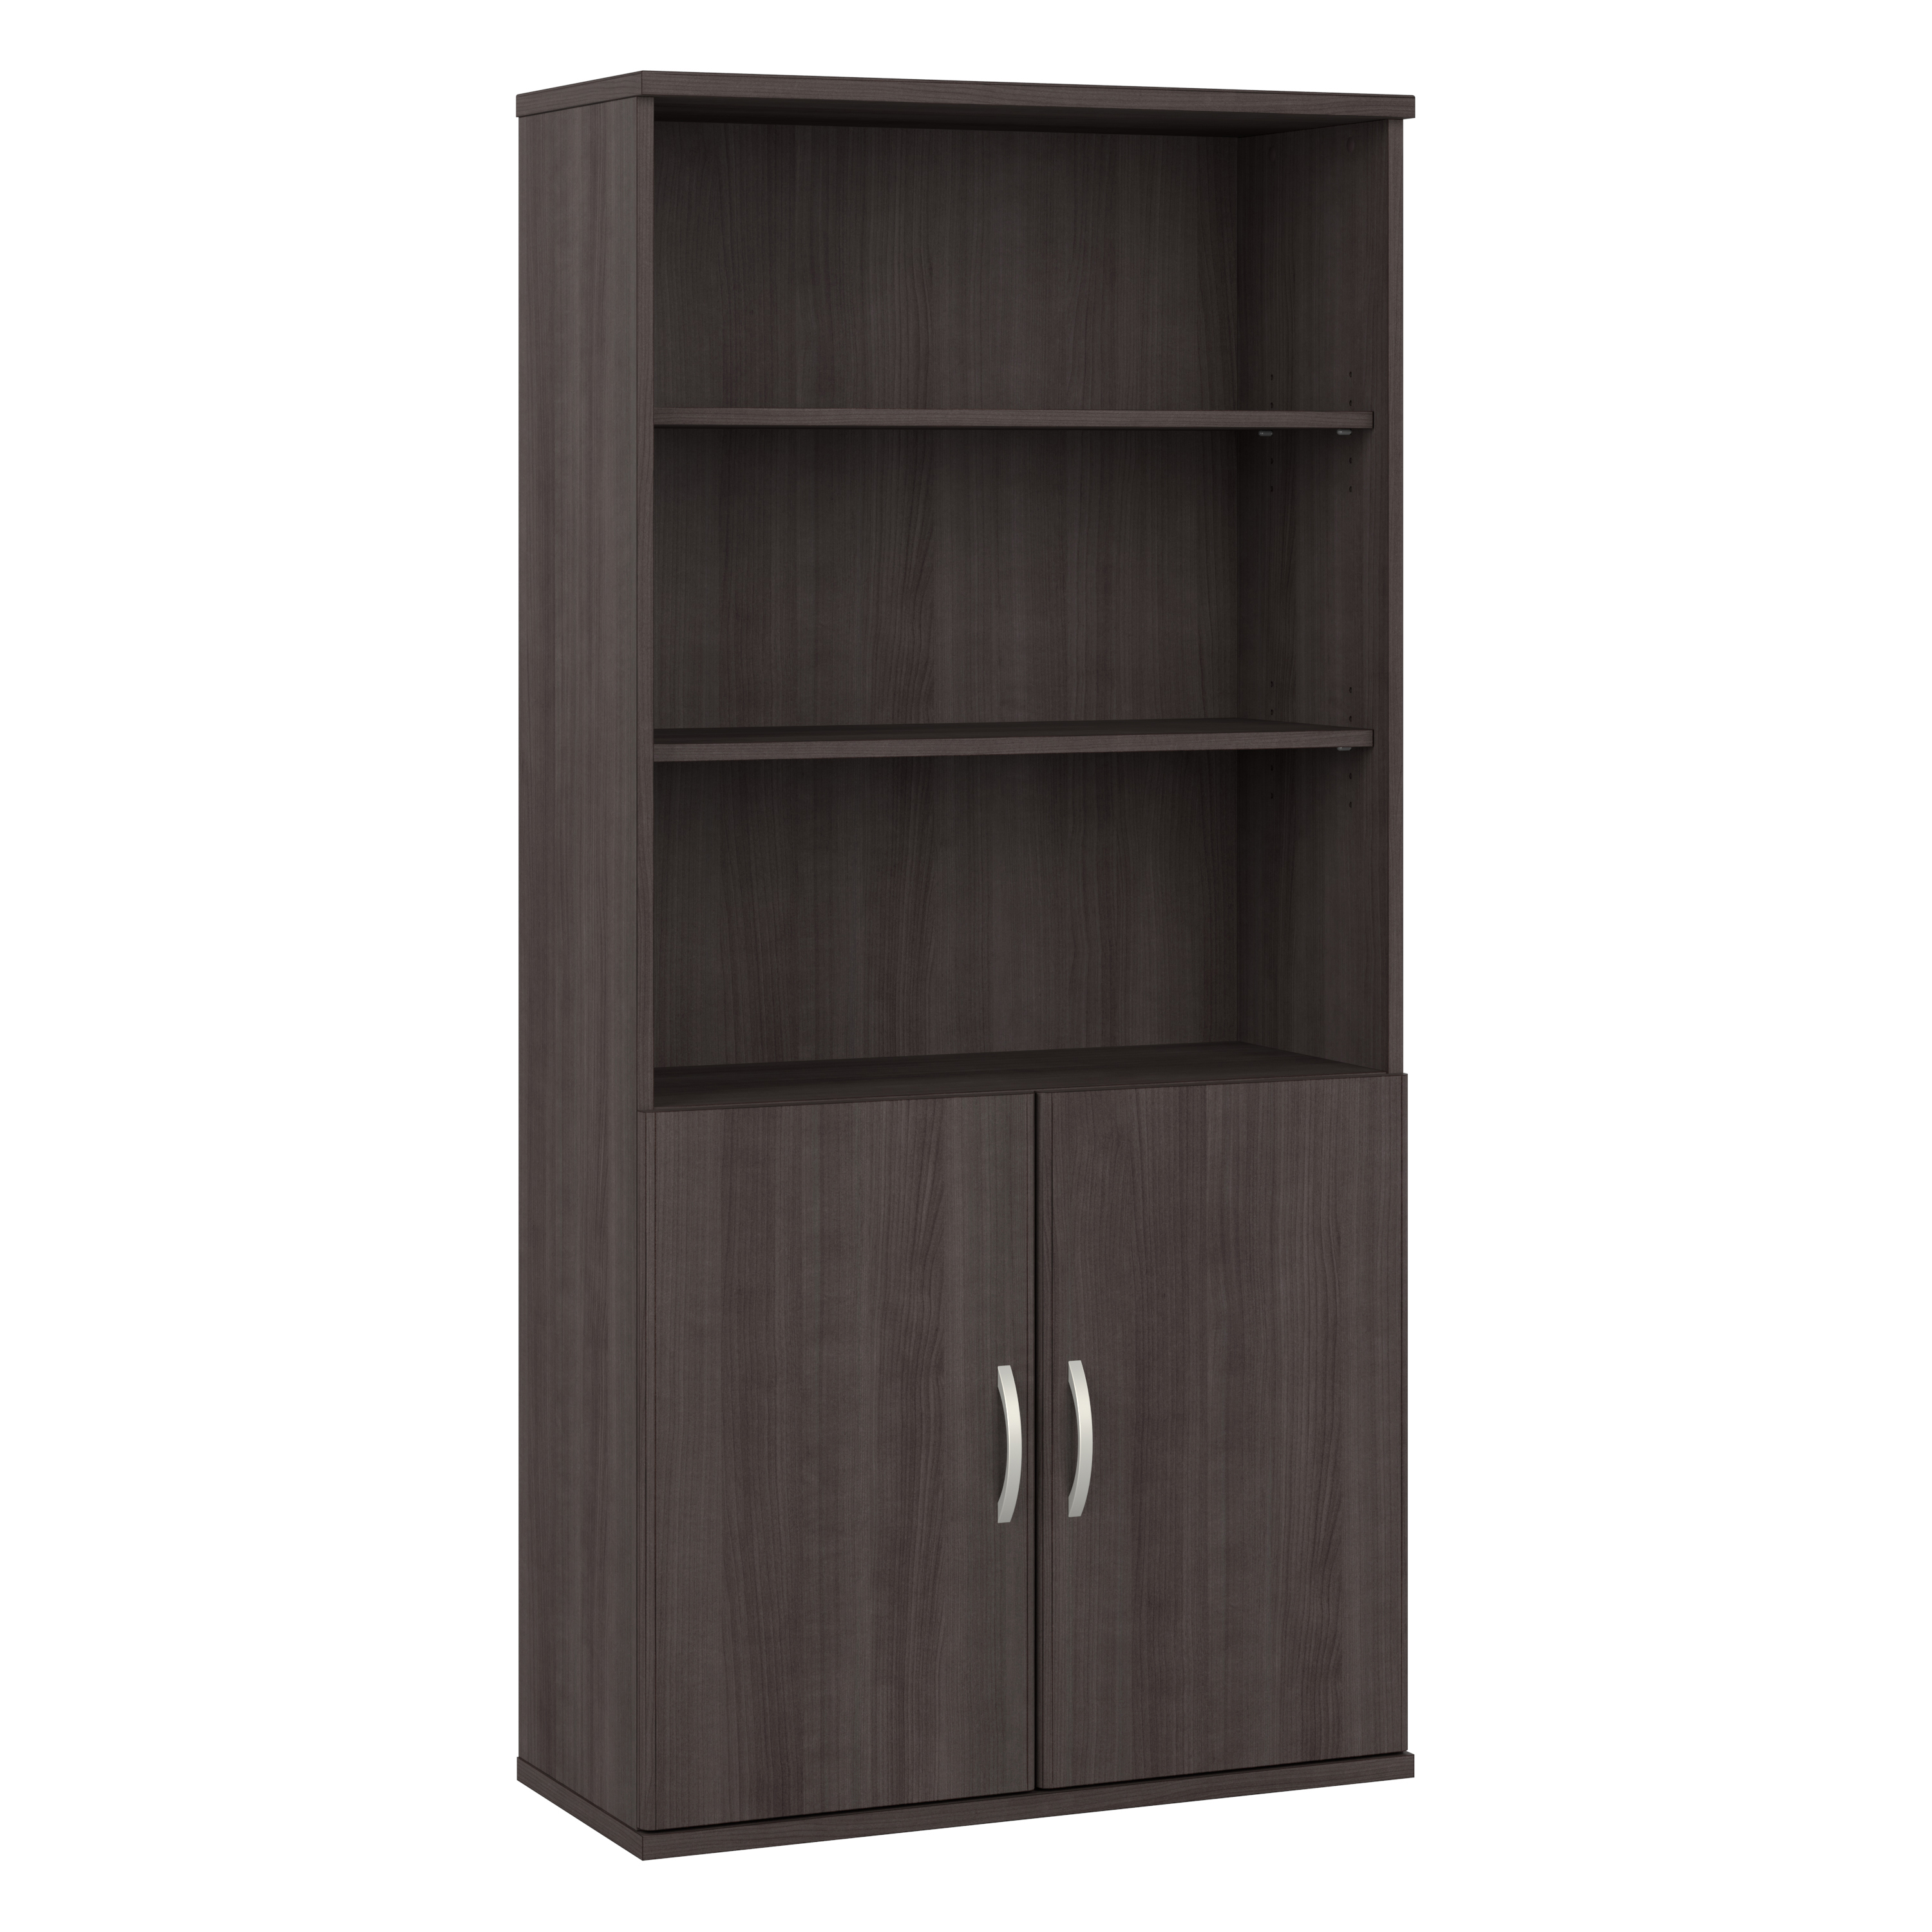 Shop Bush Business Furniture Hybrid Tall 5 Shelf Bookcase with Doors 02 HYB024SG #color_storm gray